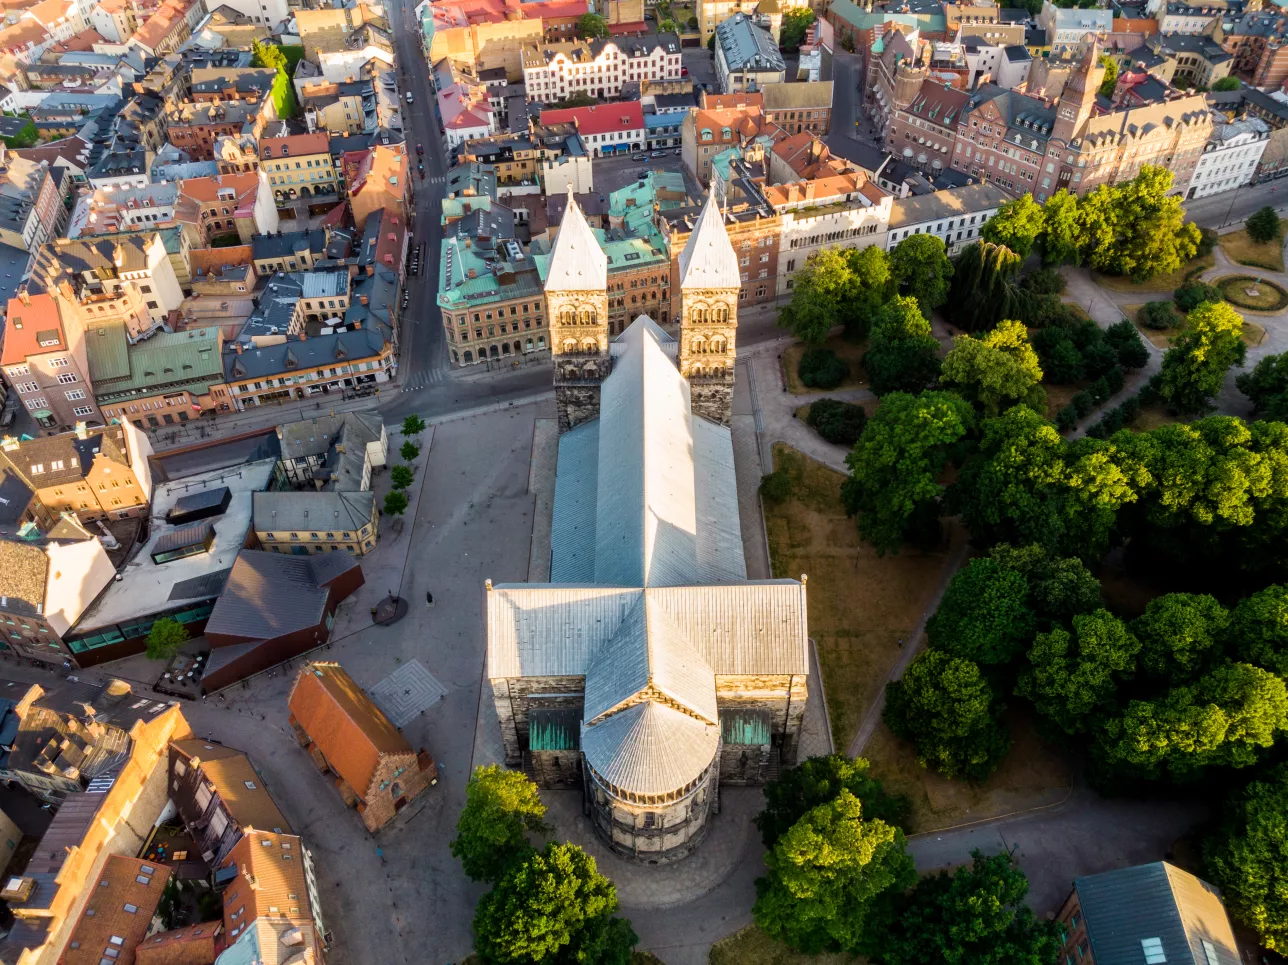 Lund Cathedral.  Photo credit: Florent Renaud